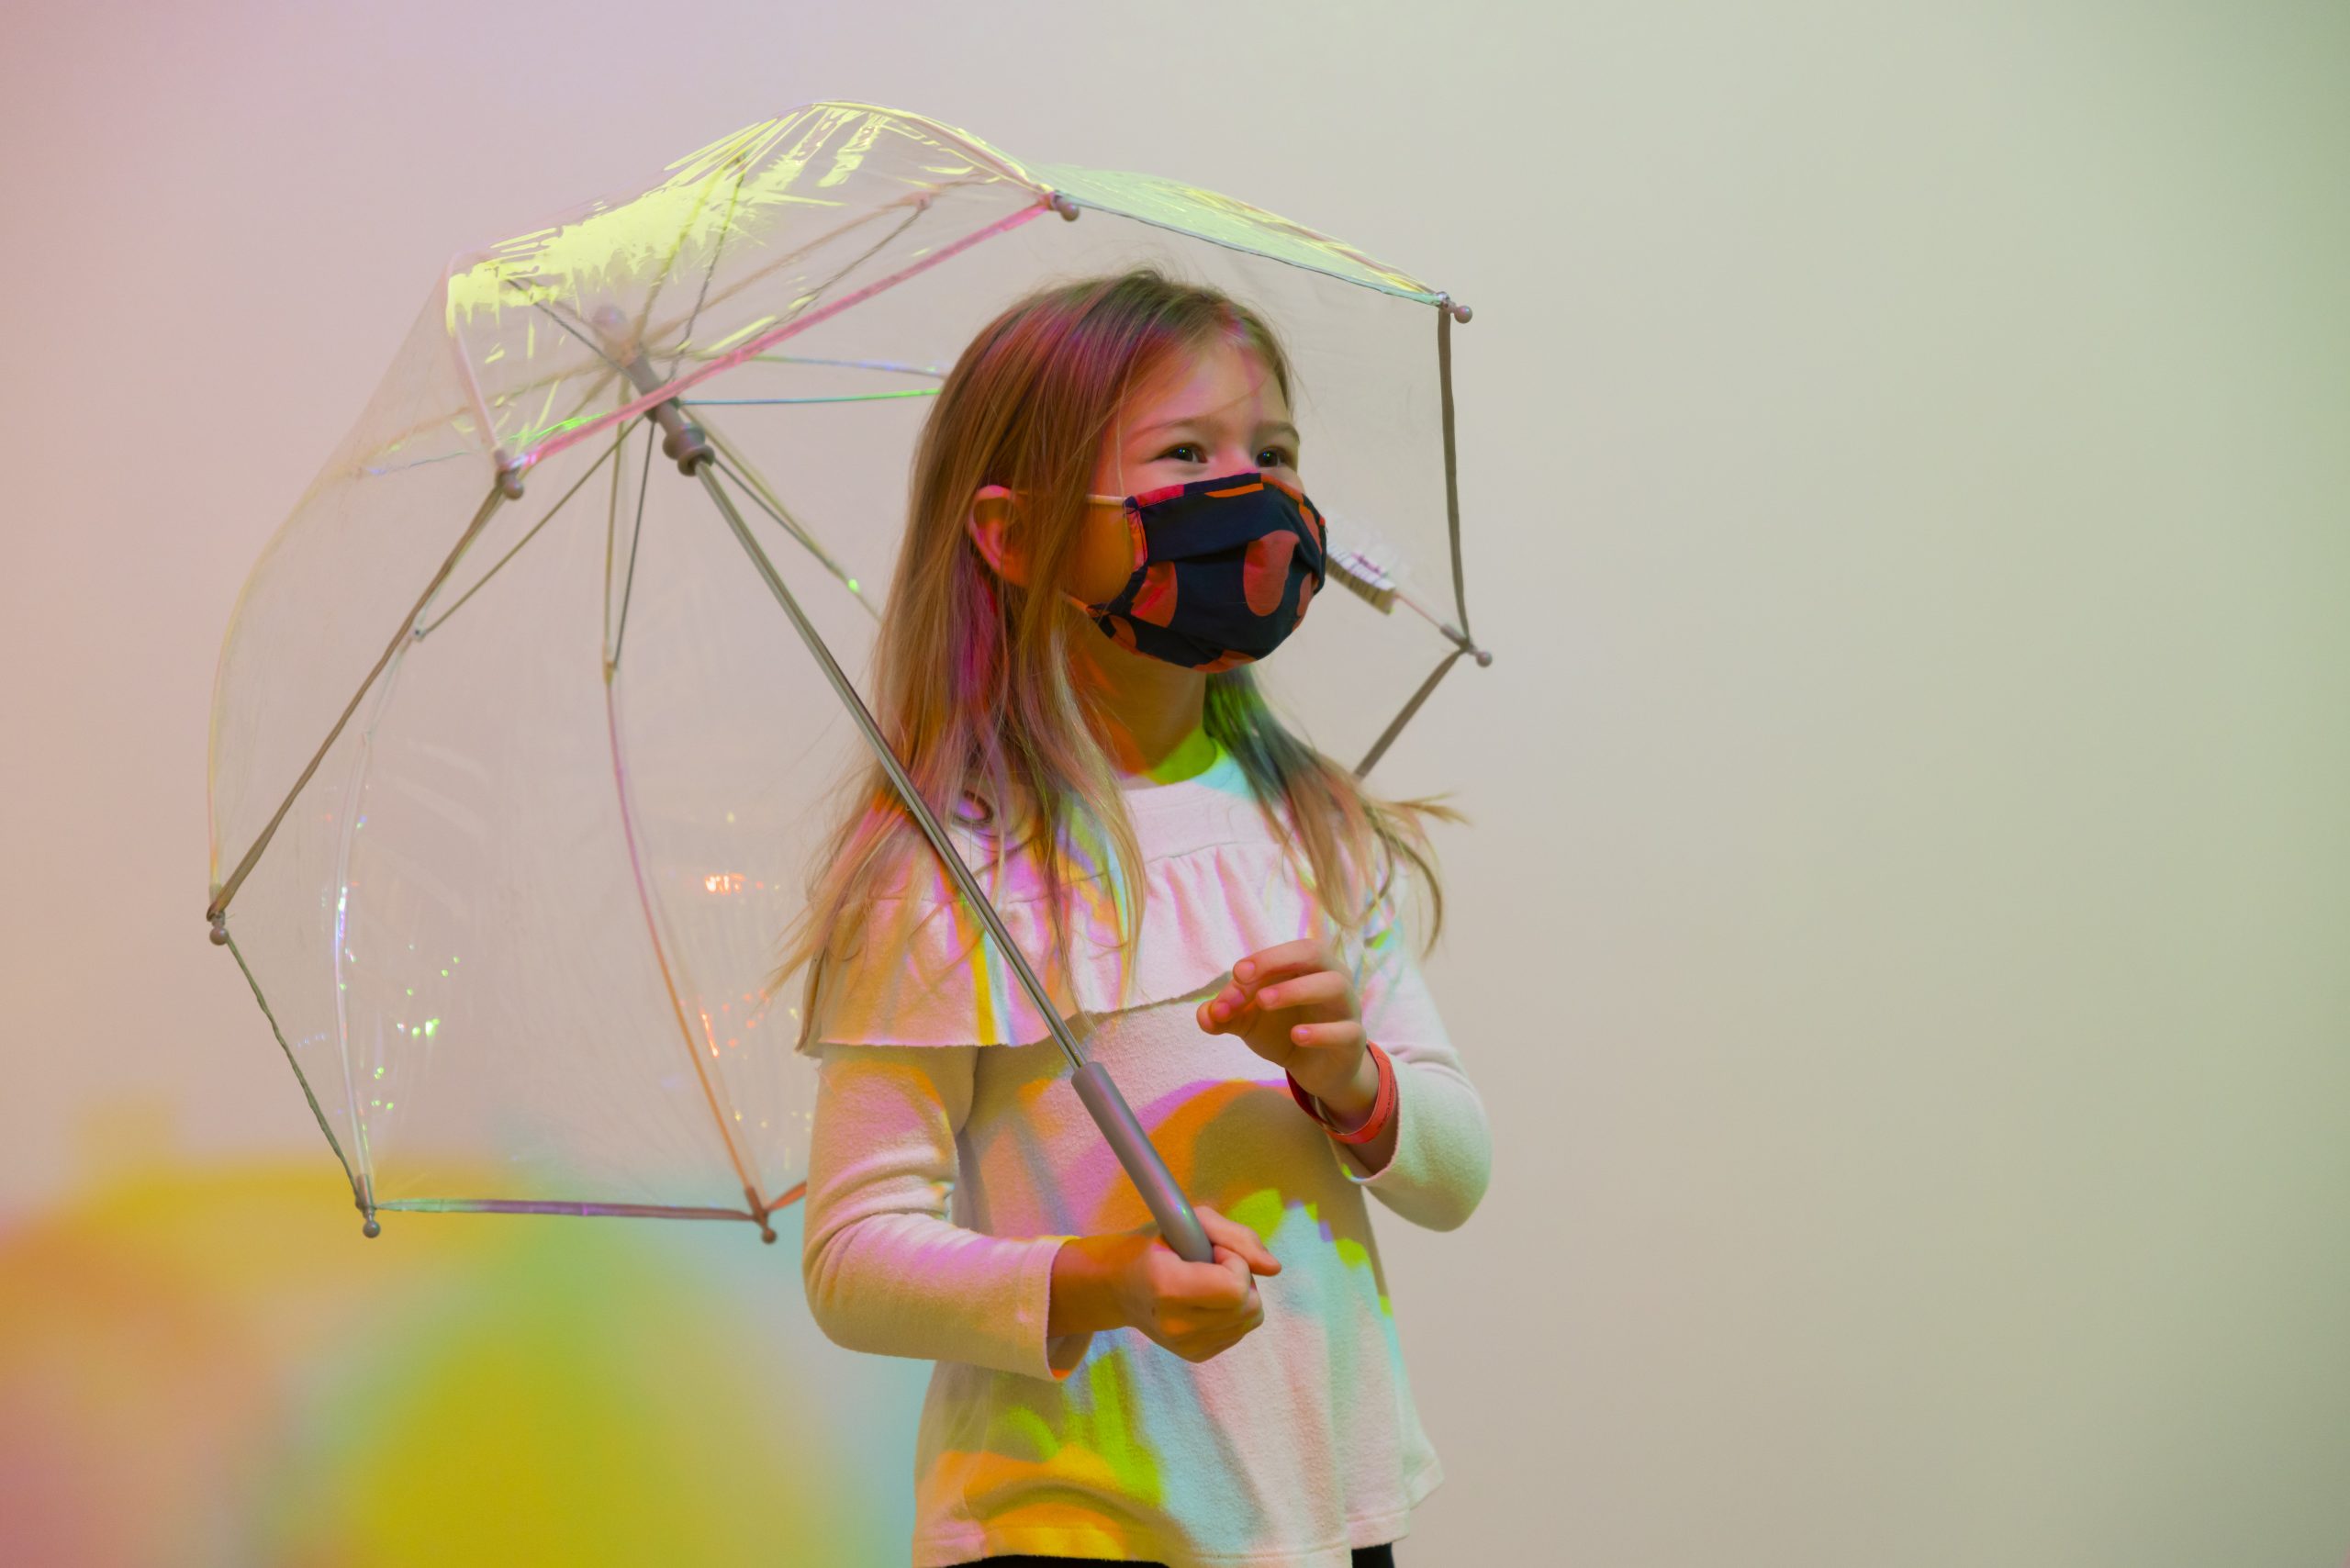 A young child holds a clear umbrella over her head. Red, yellow, and blue shadows are created behind her by lights (not pictured) hanging from above.